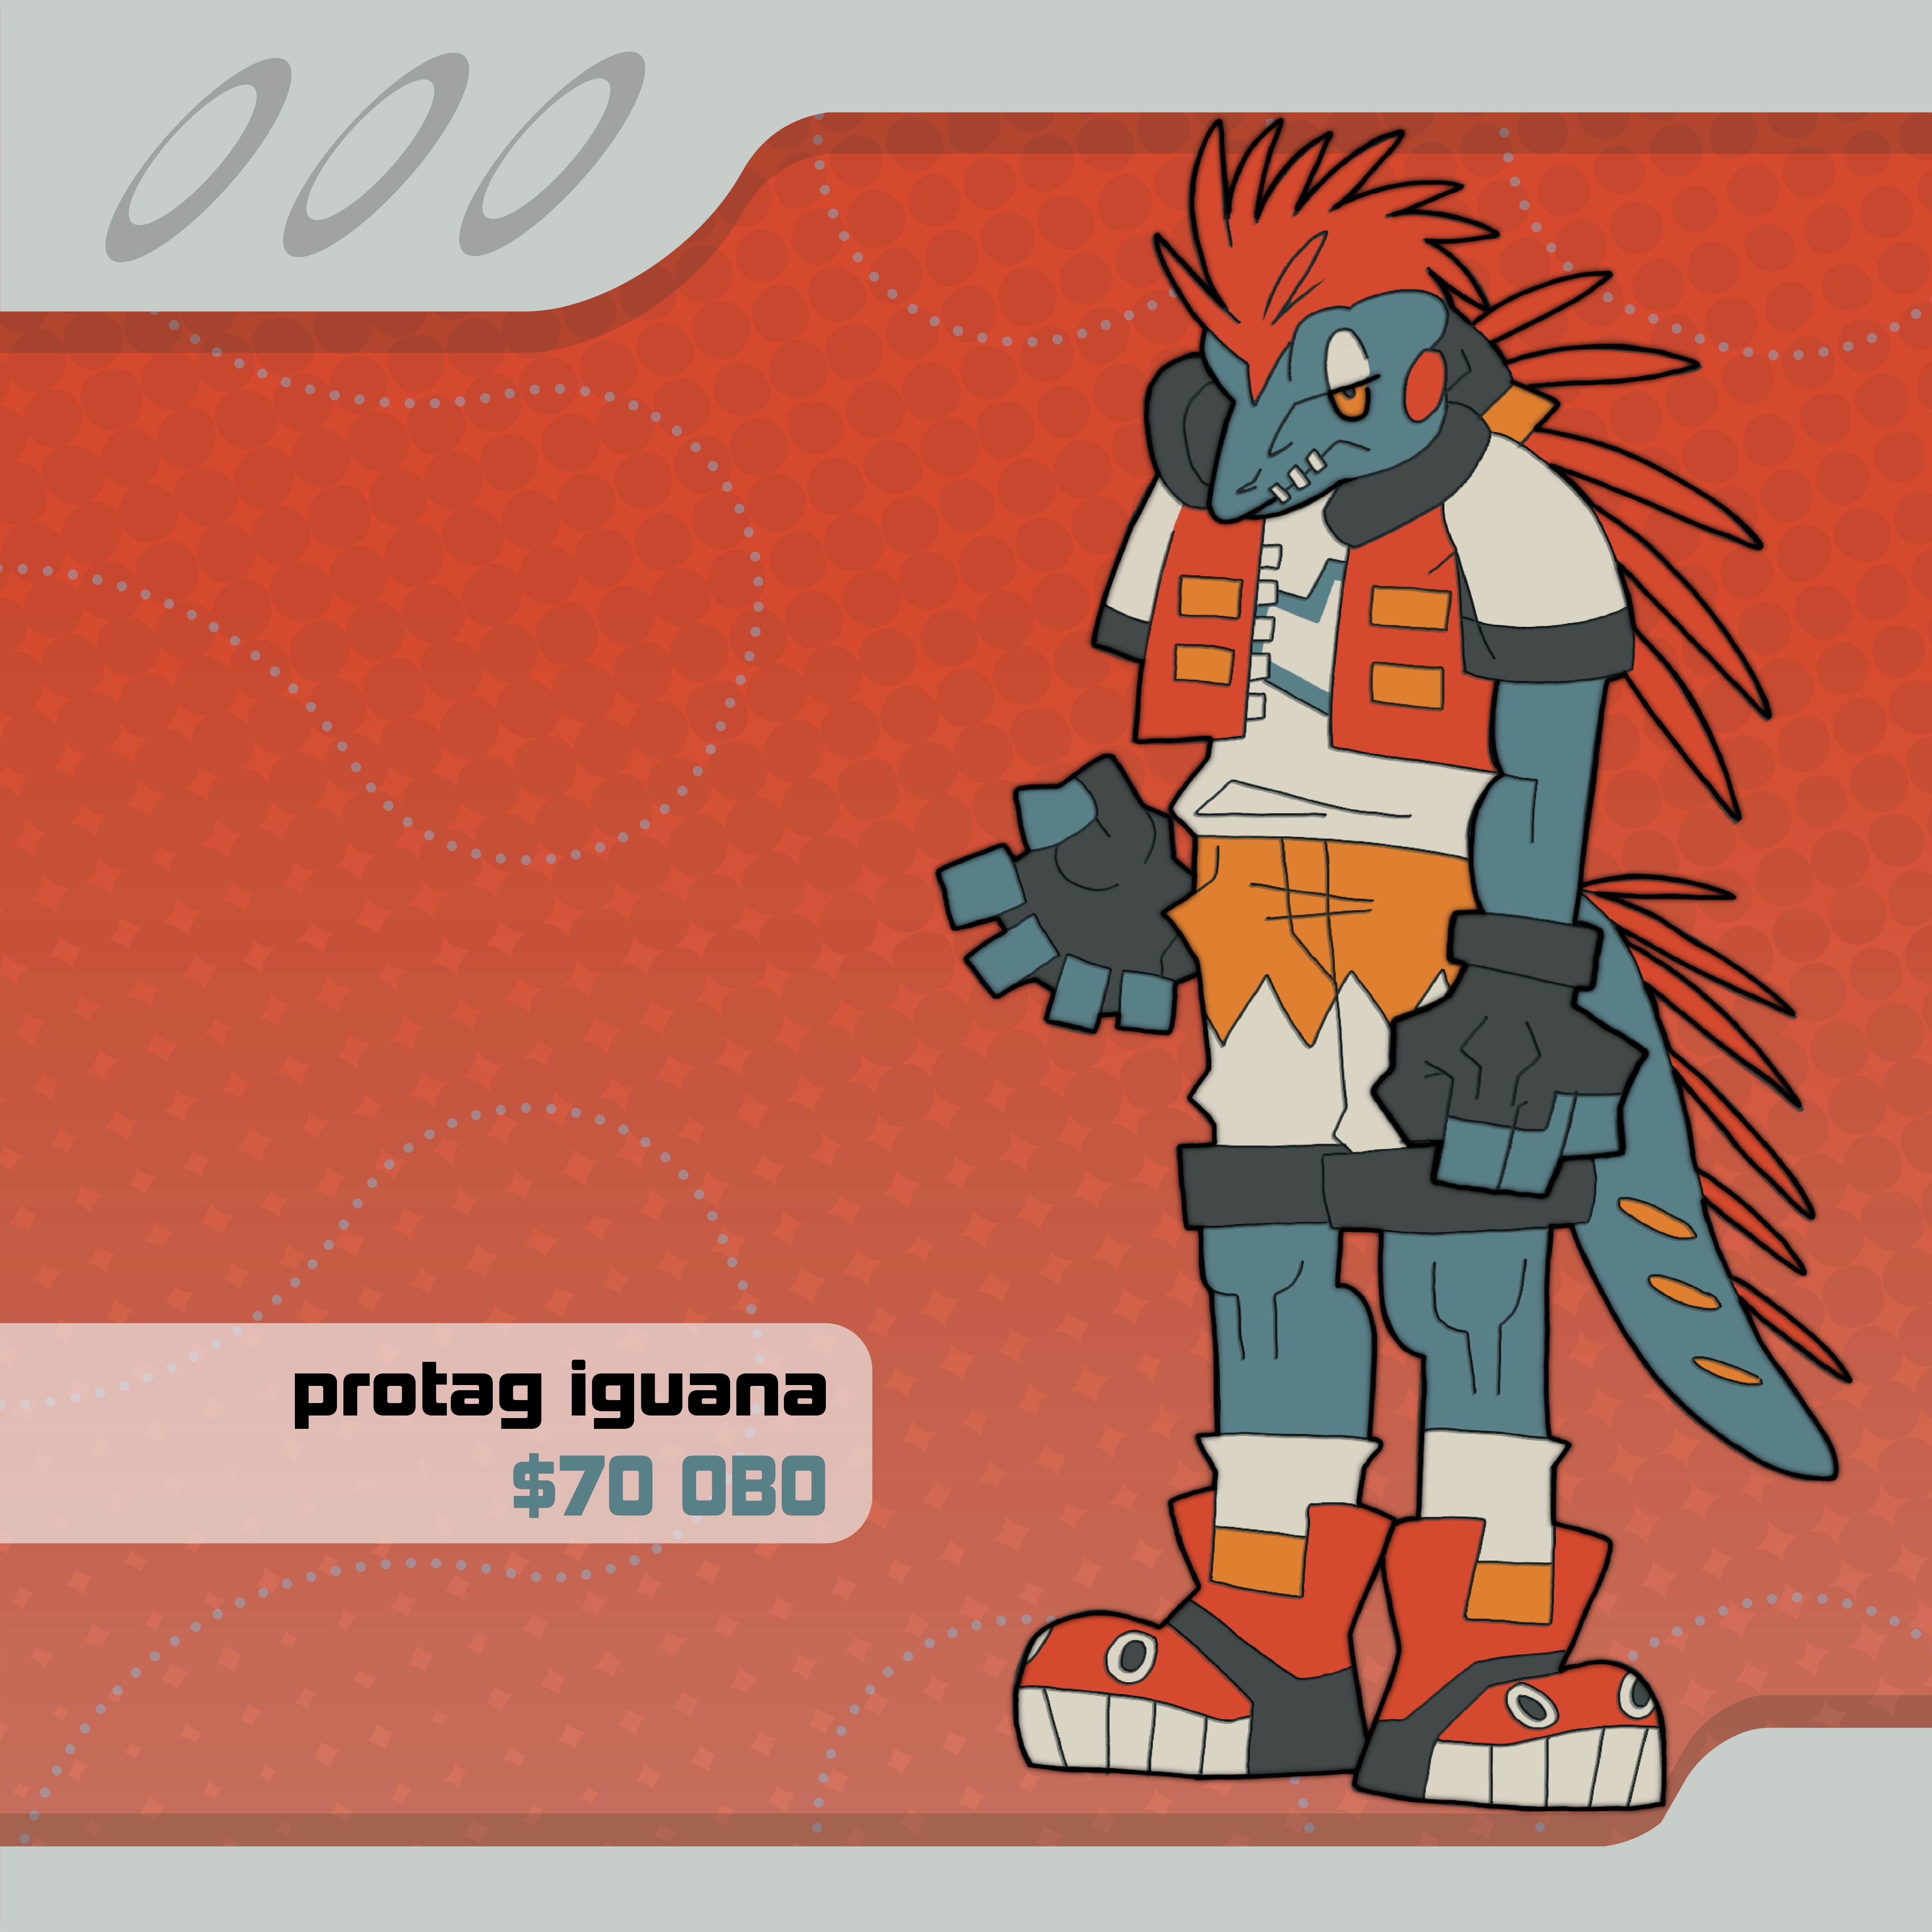 A character design based on an iguana and 90s anime protagonists that I made to sell.